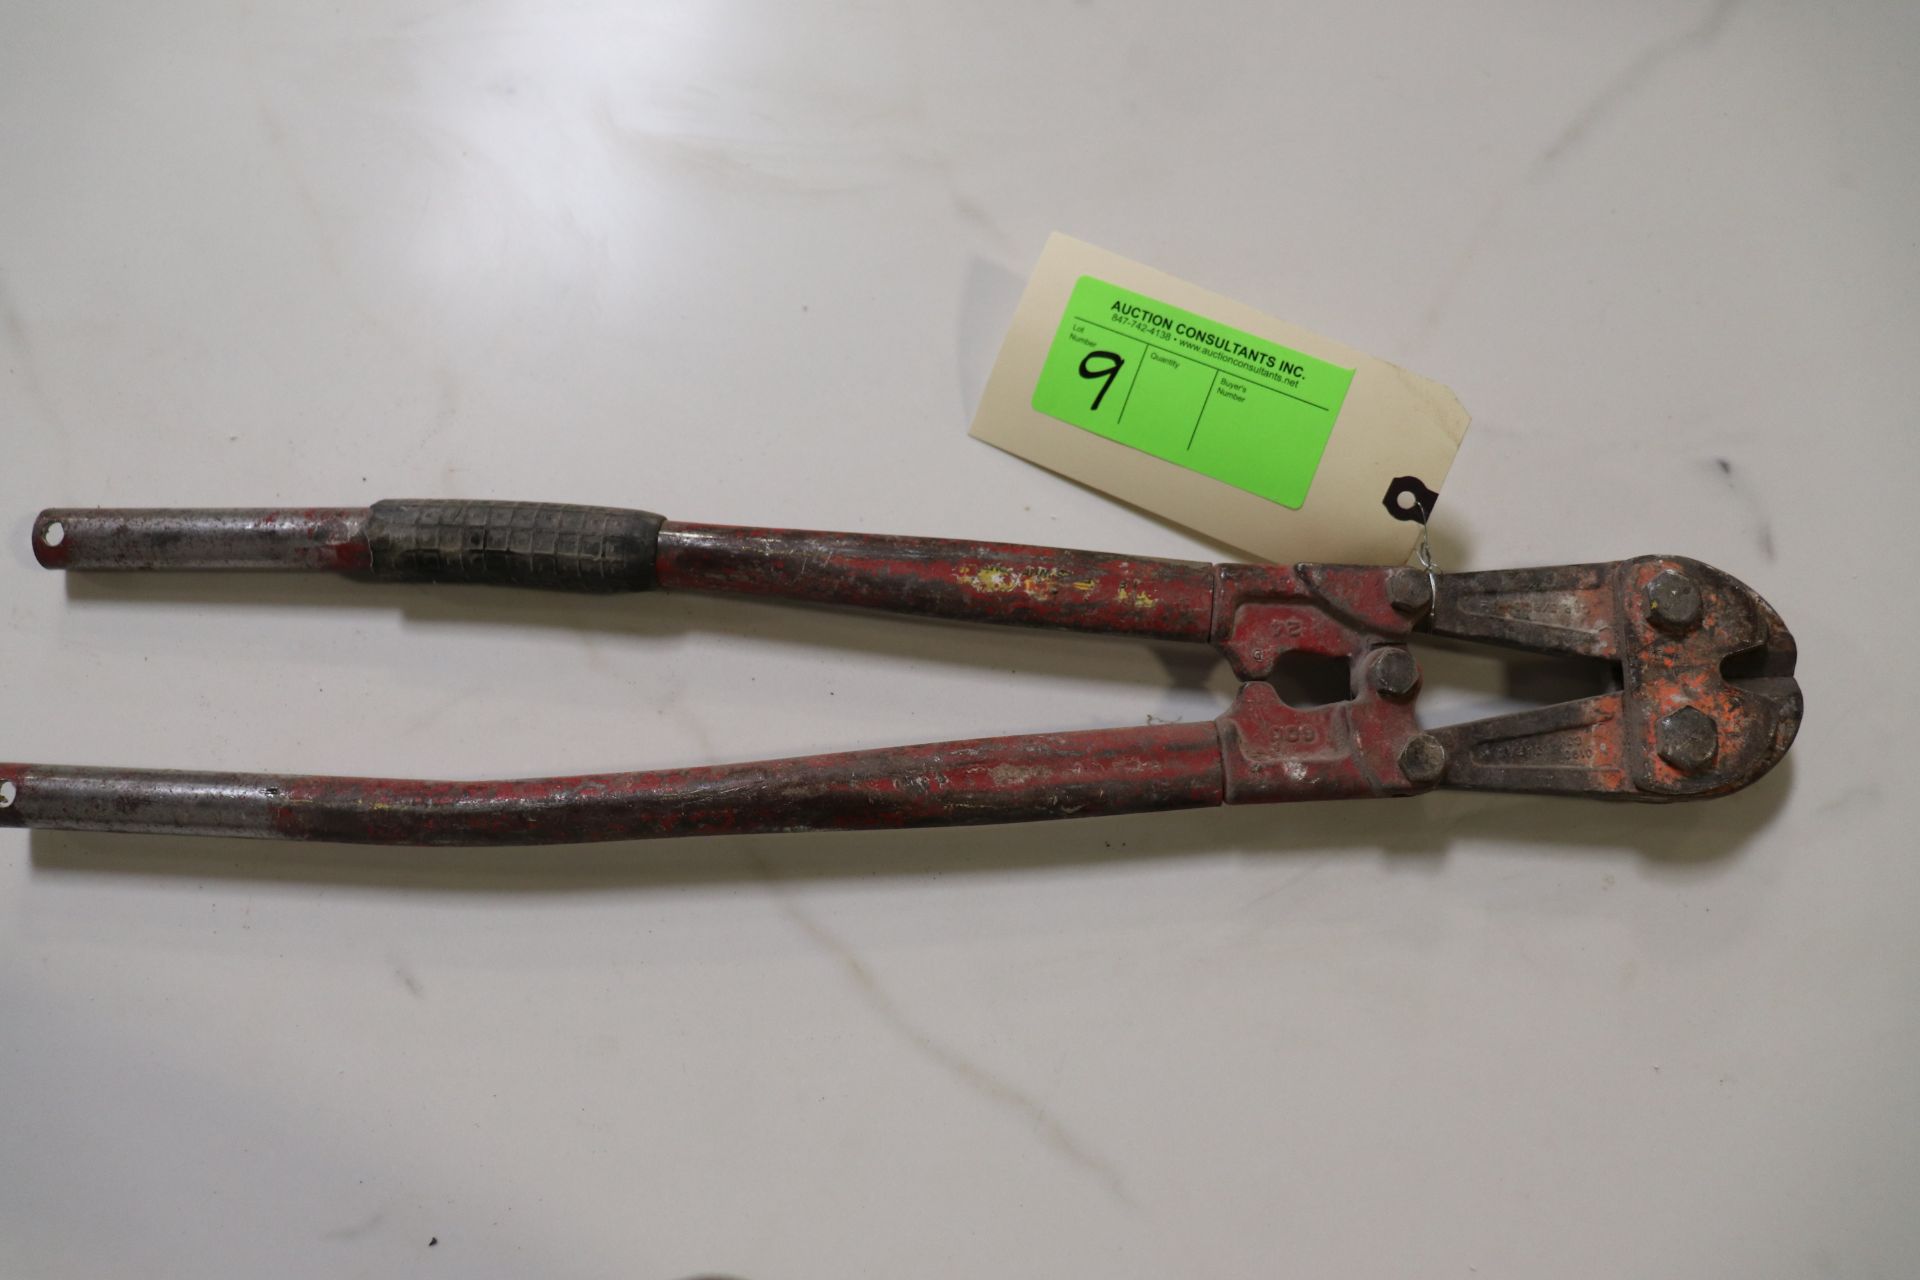 Pair of 24" pipe cutters